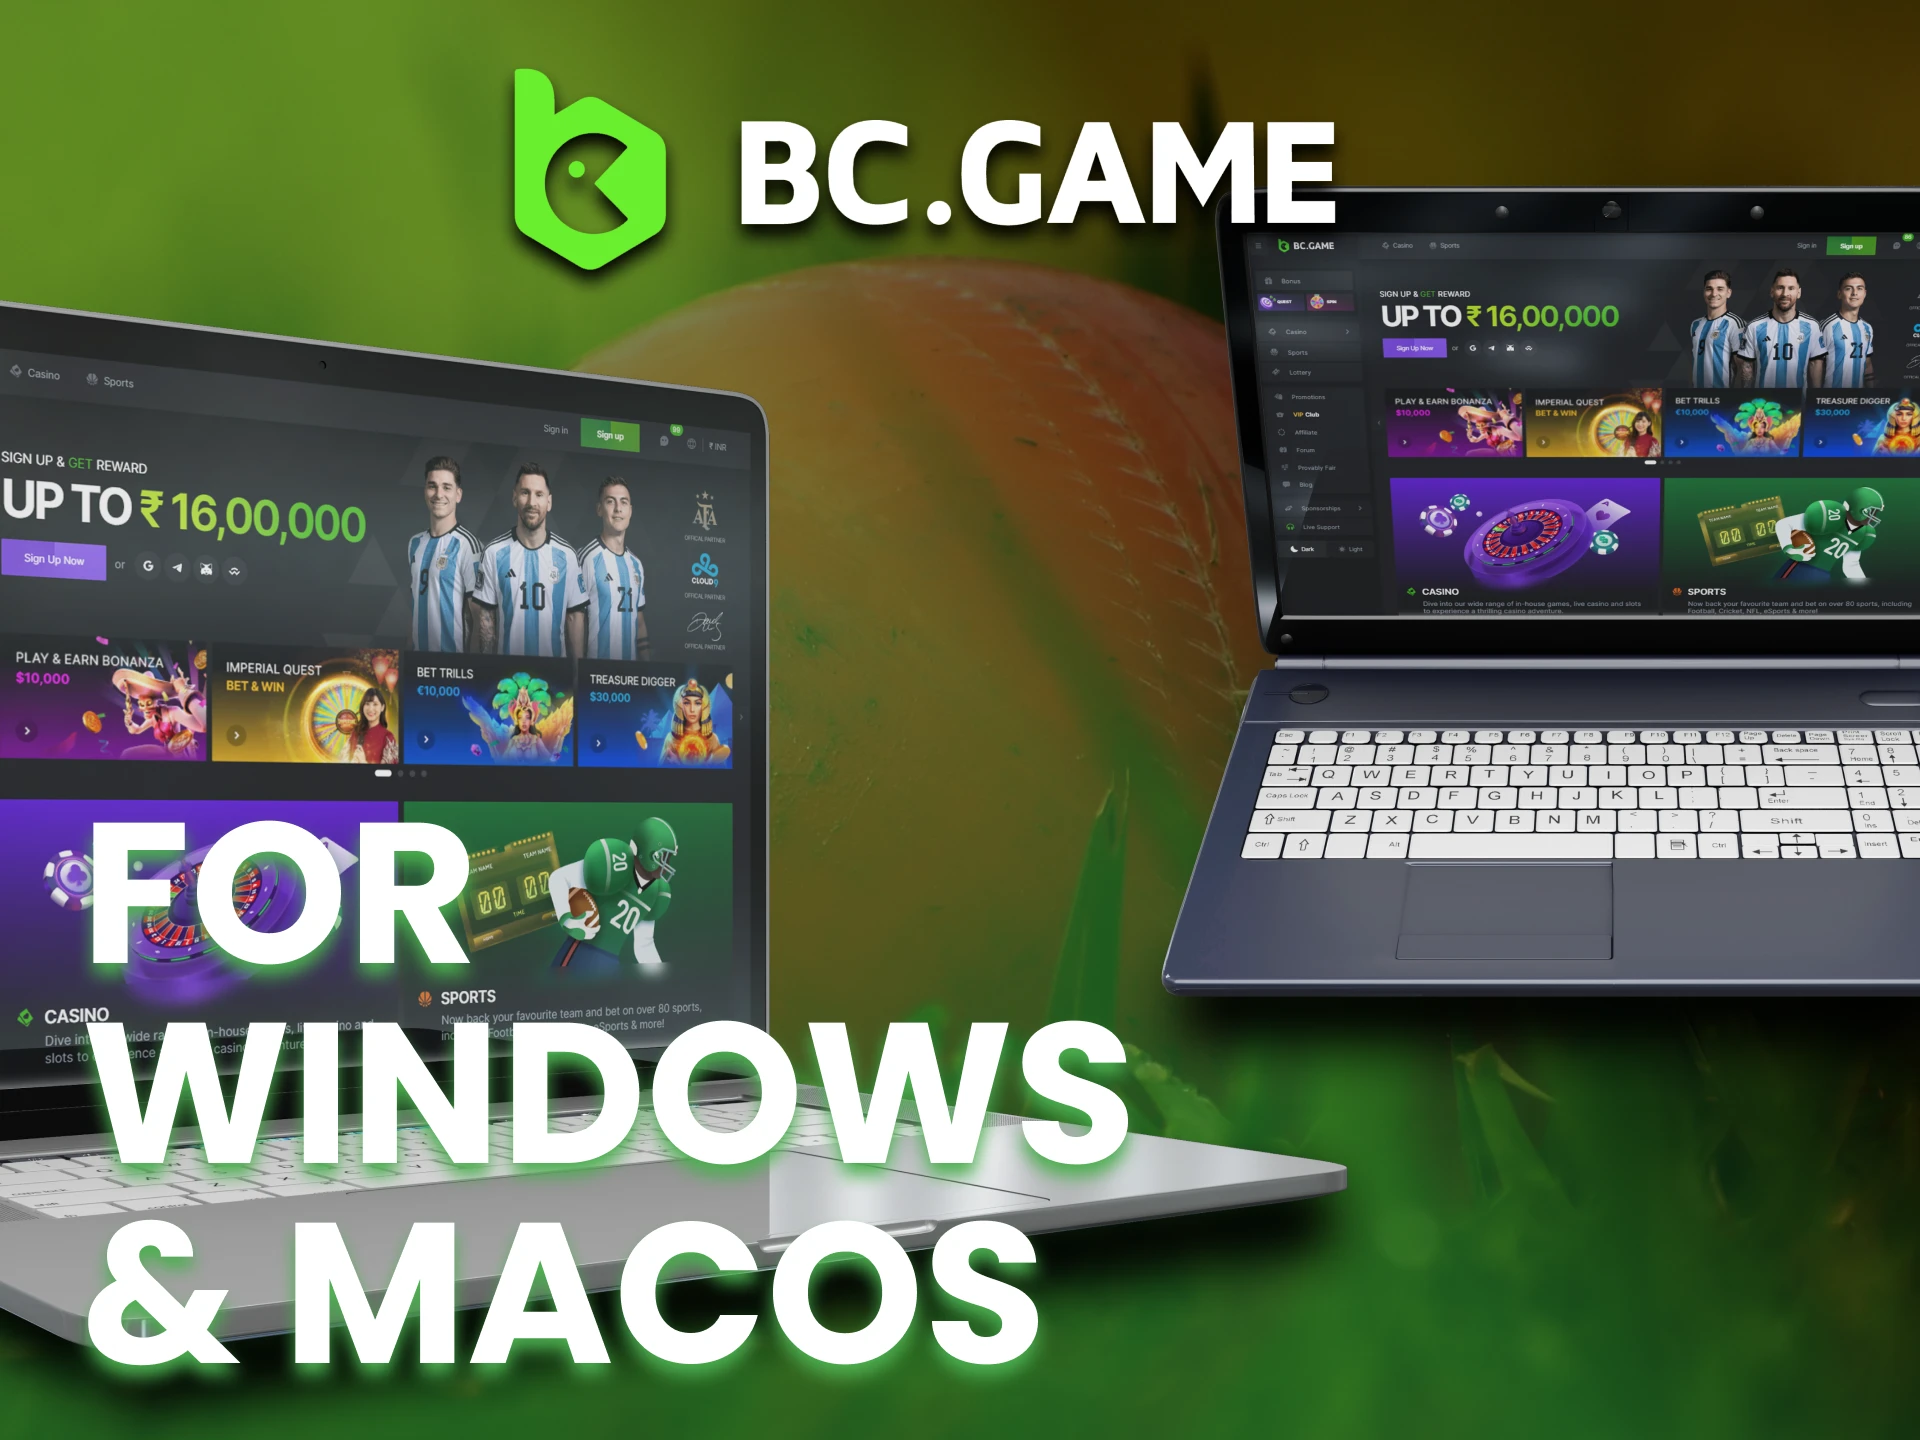 Download BC Game client on your PC.